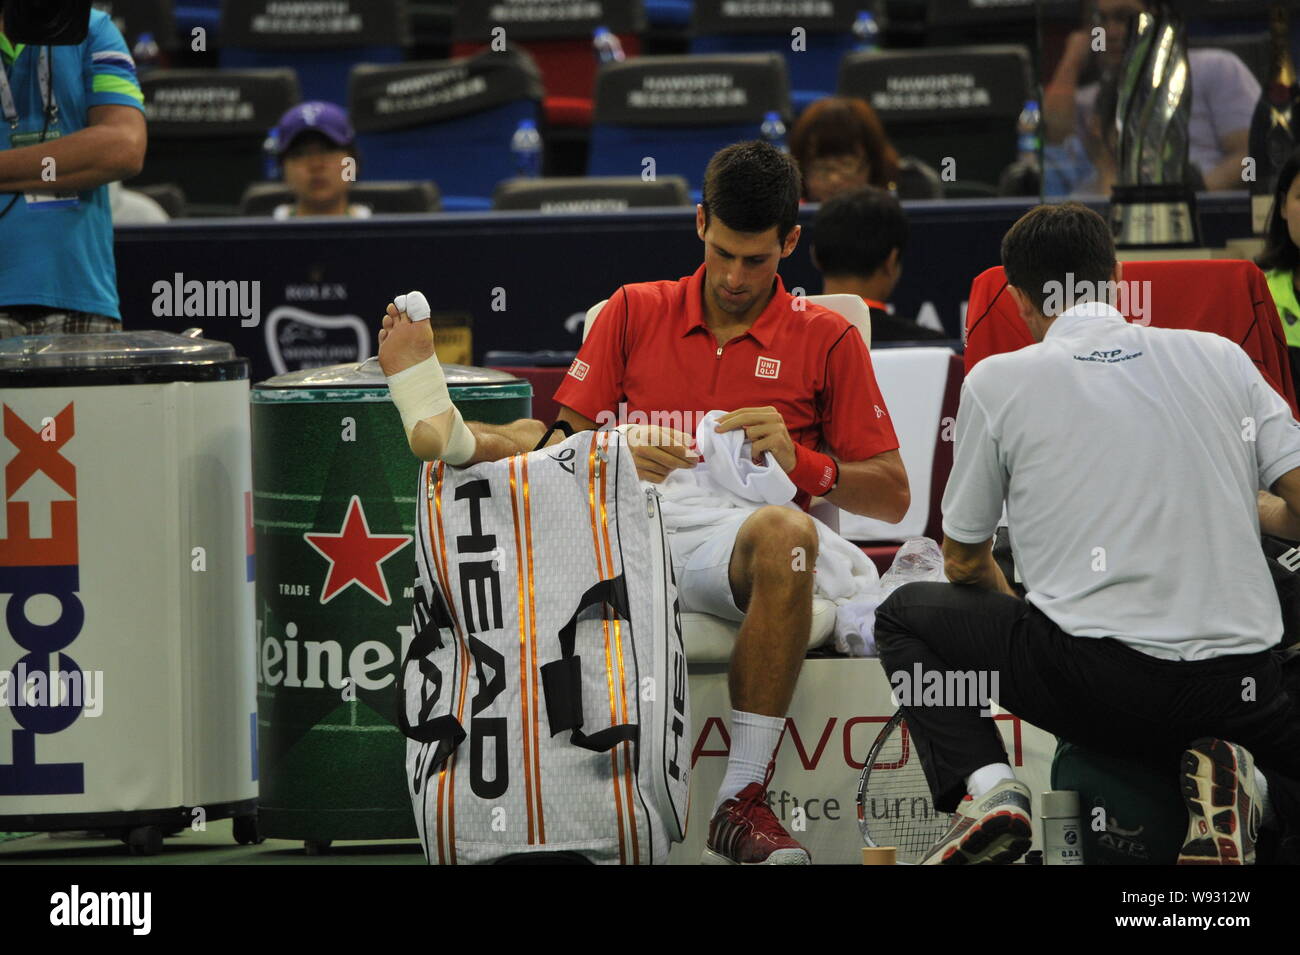 Serbias Novak Djokovic receives medical attention on his foot during a match against Spains Marcel Granollers for the Shanghai Masters tennis tourname Stock Photo